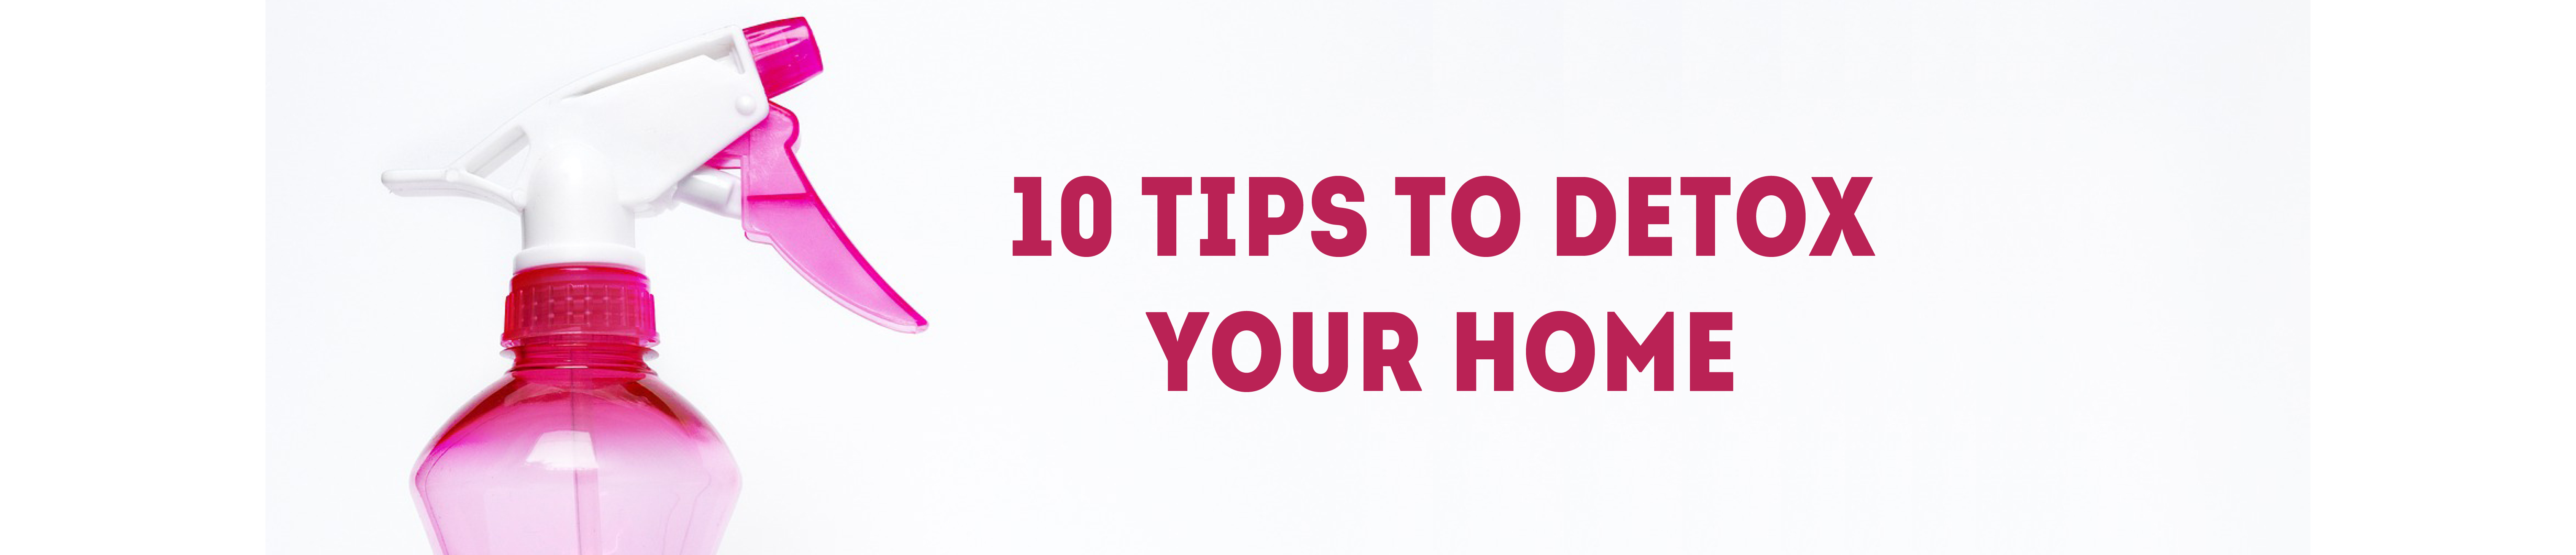 10 Tips to Detox Your Home